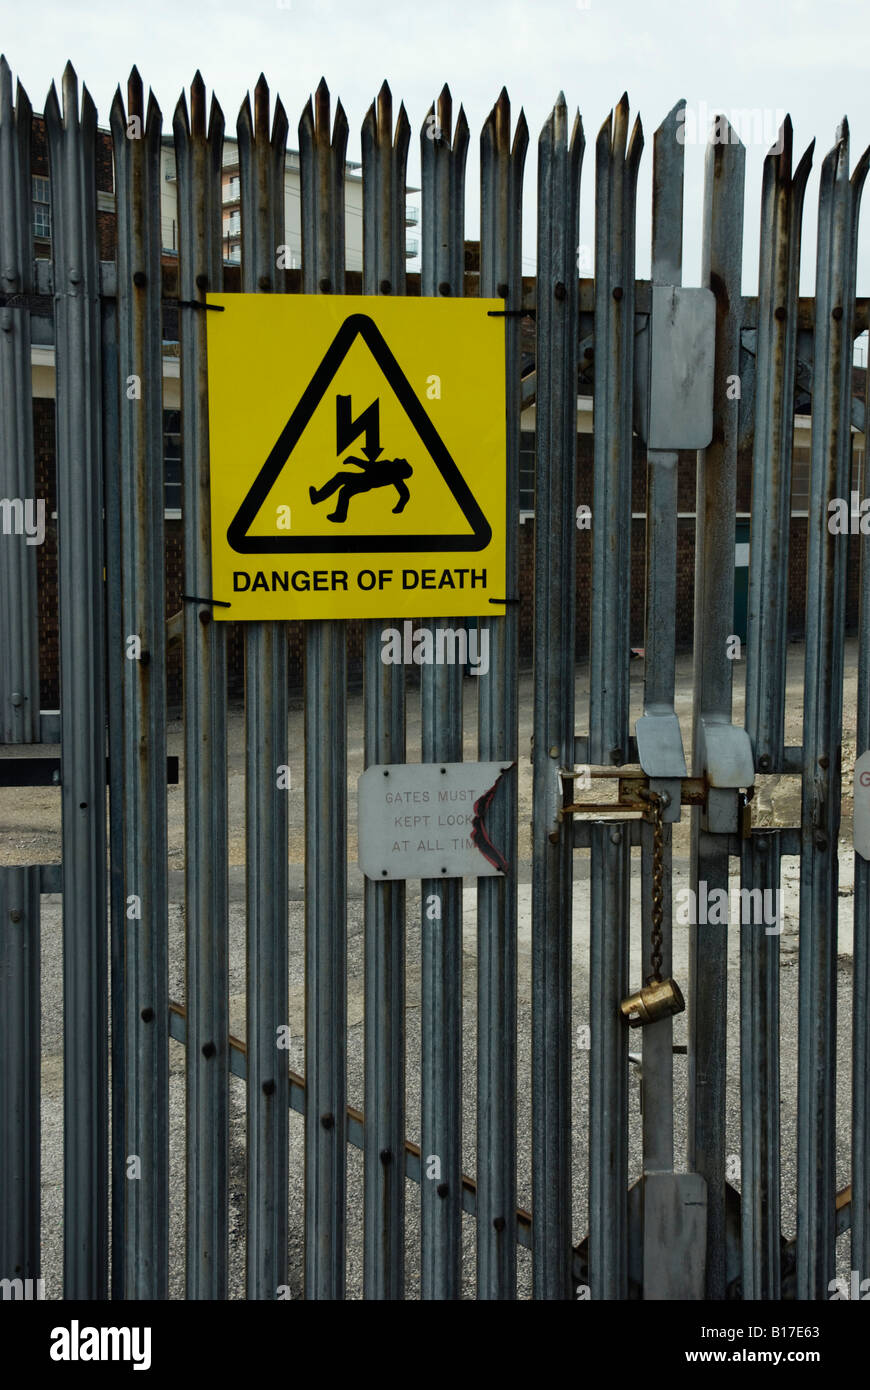 Danger of death sign on high security fence Stock Photo